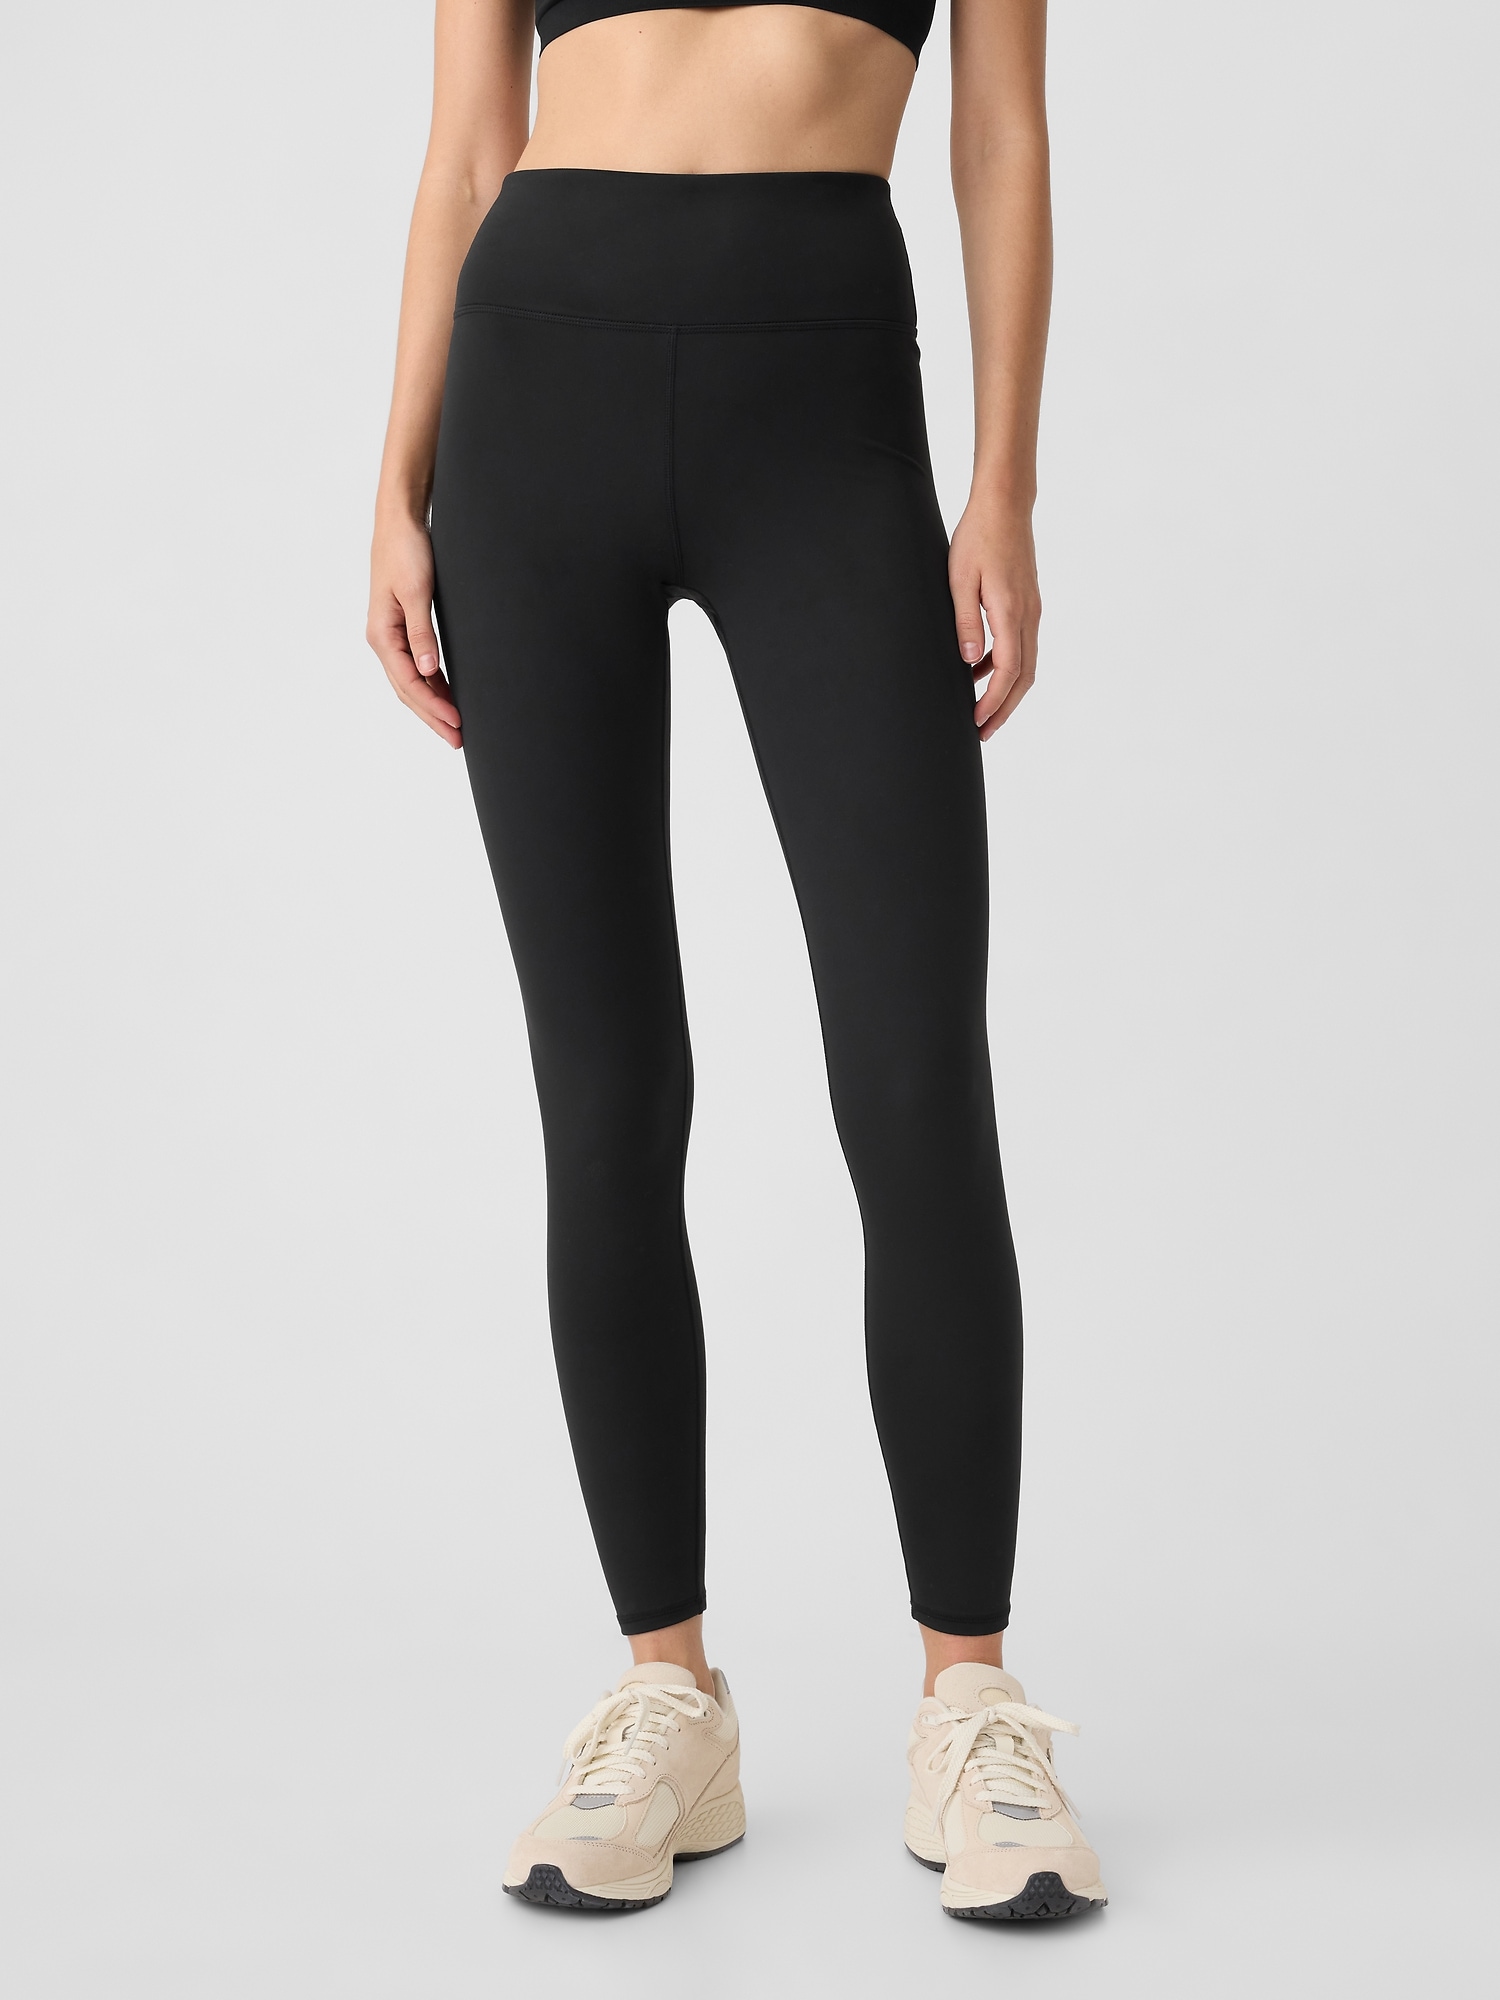 GapFit High-Rise Blackout Full Length Leggings, A Complete Guide to Our  Editors' 50 Favourite Fitness Products